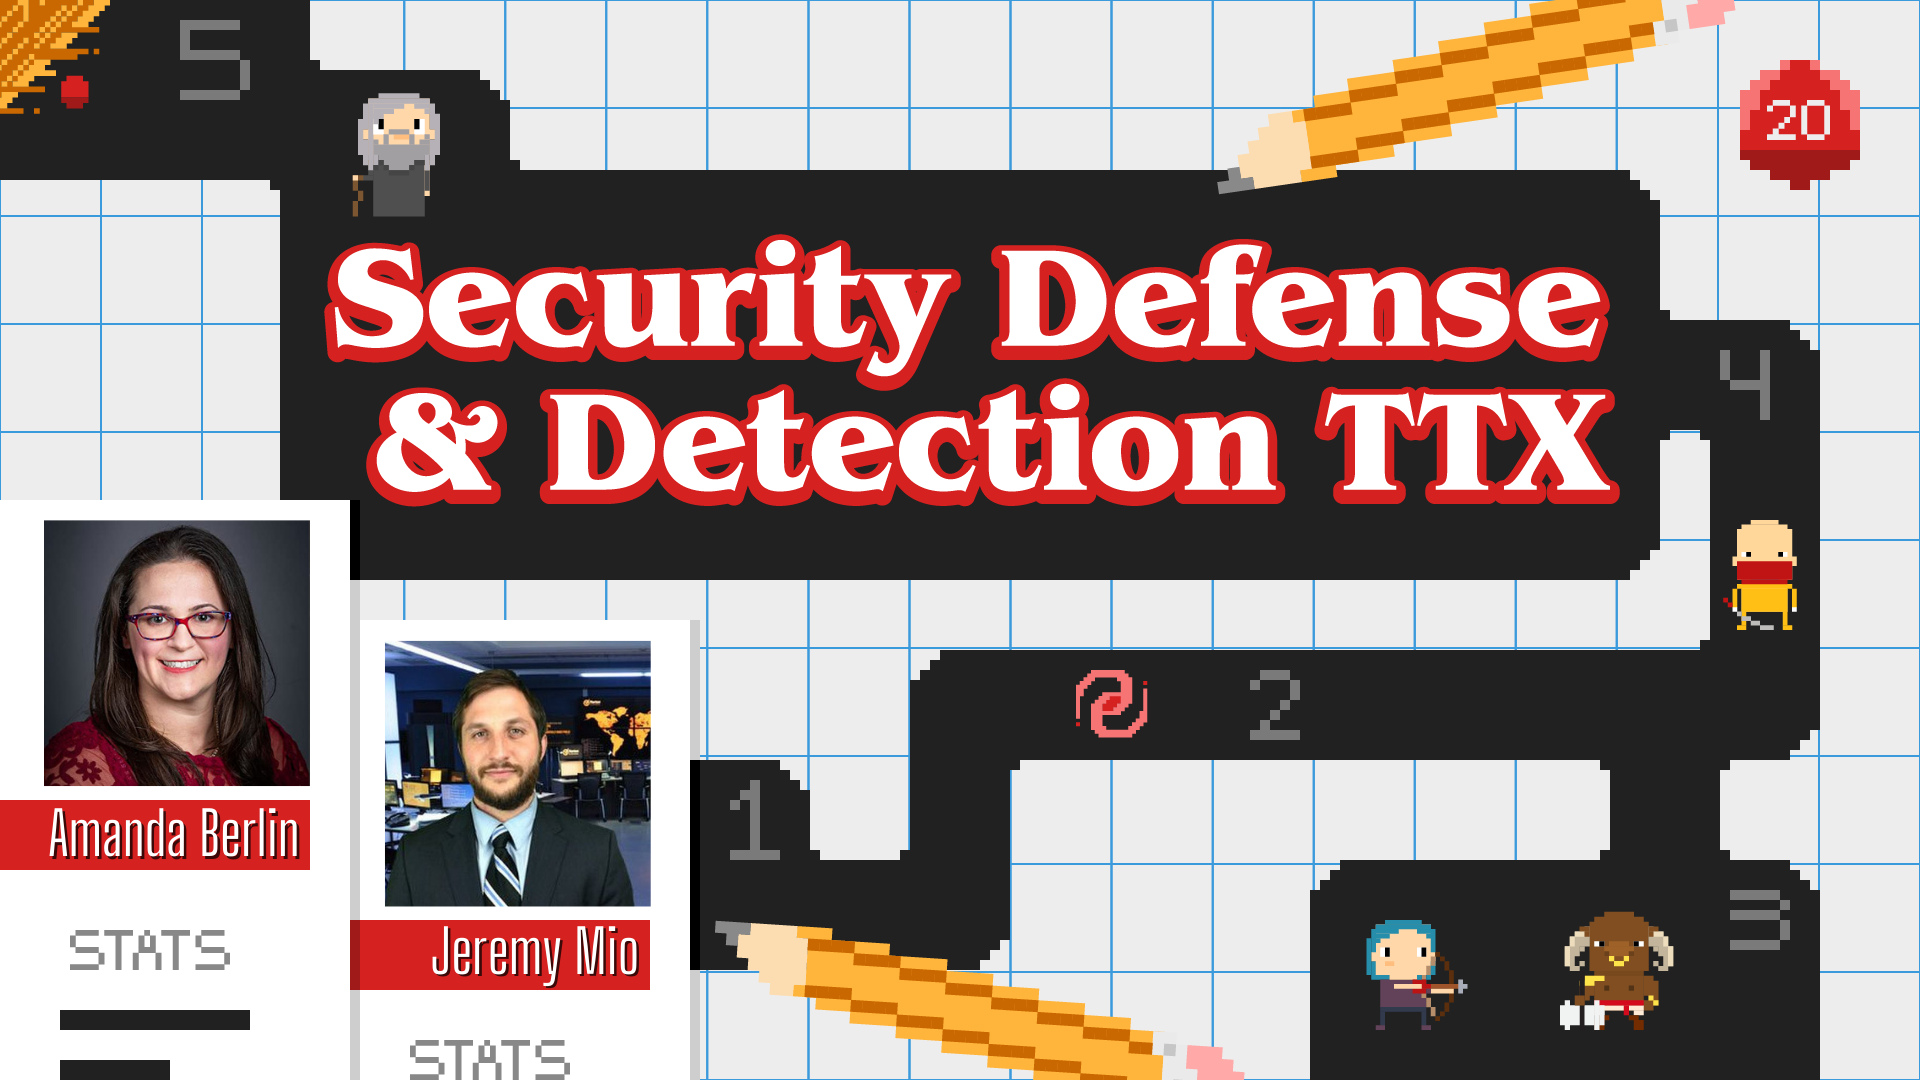 Security Defense and Detection TTX with Amanda Berlin and Jeremy Mio